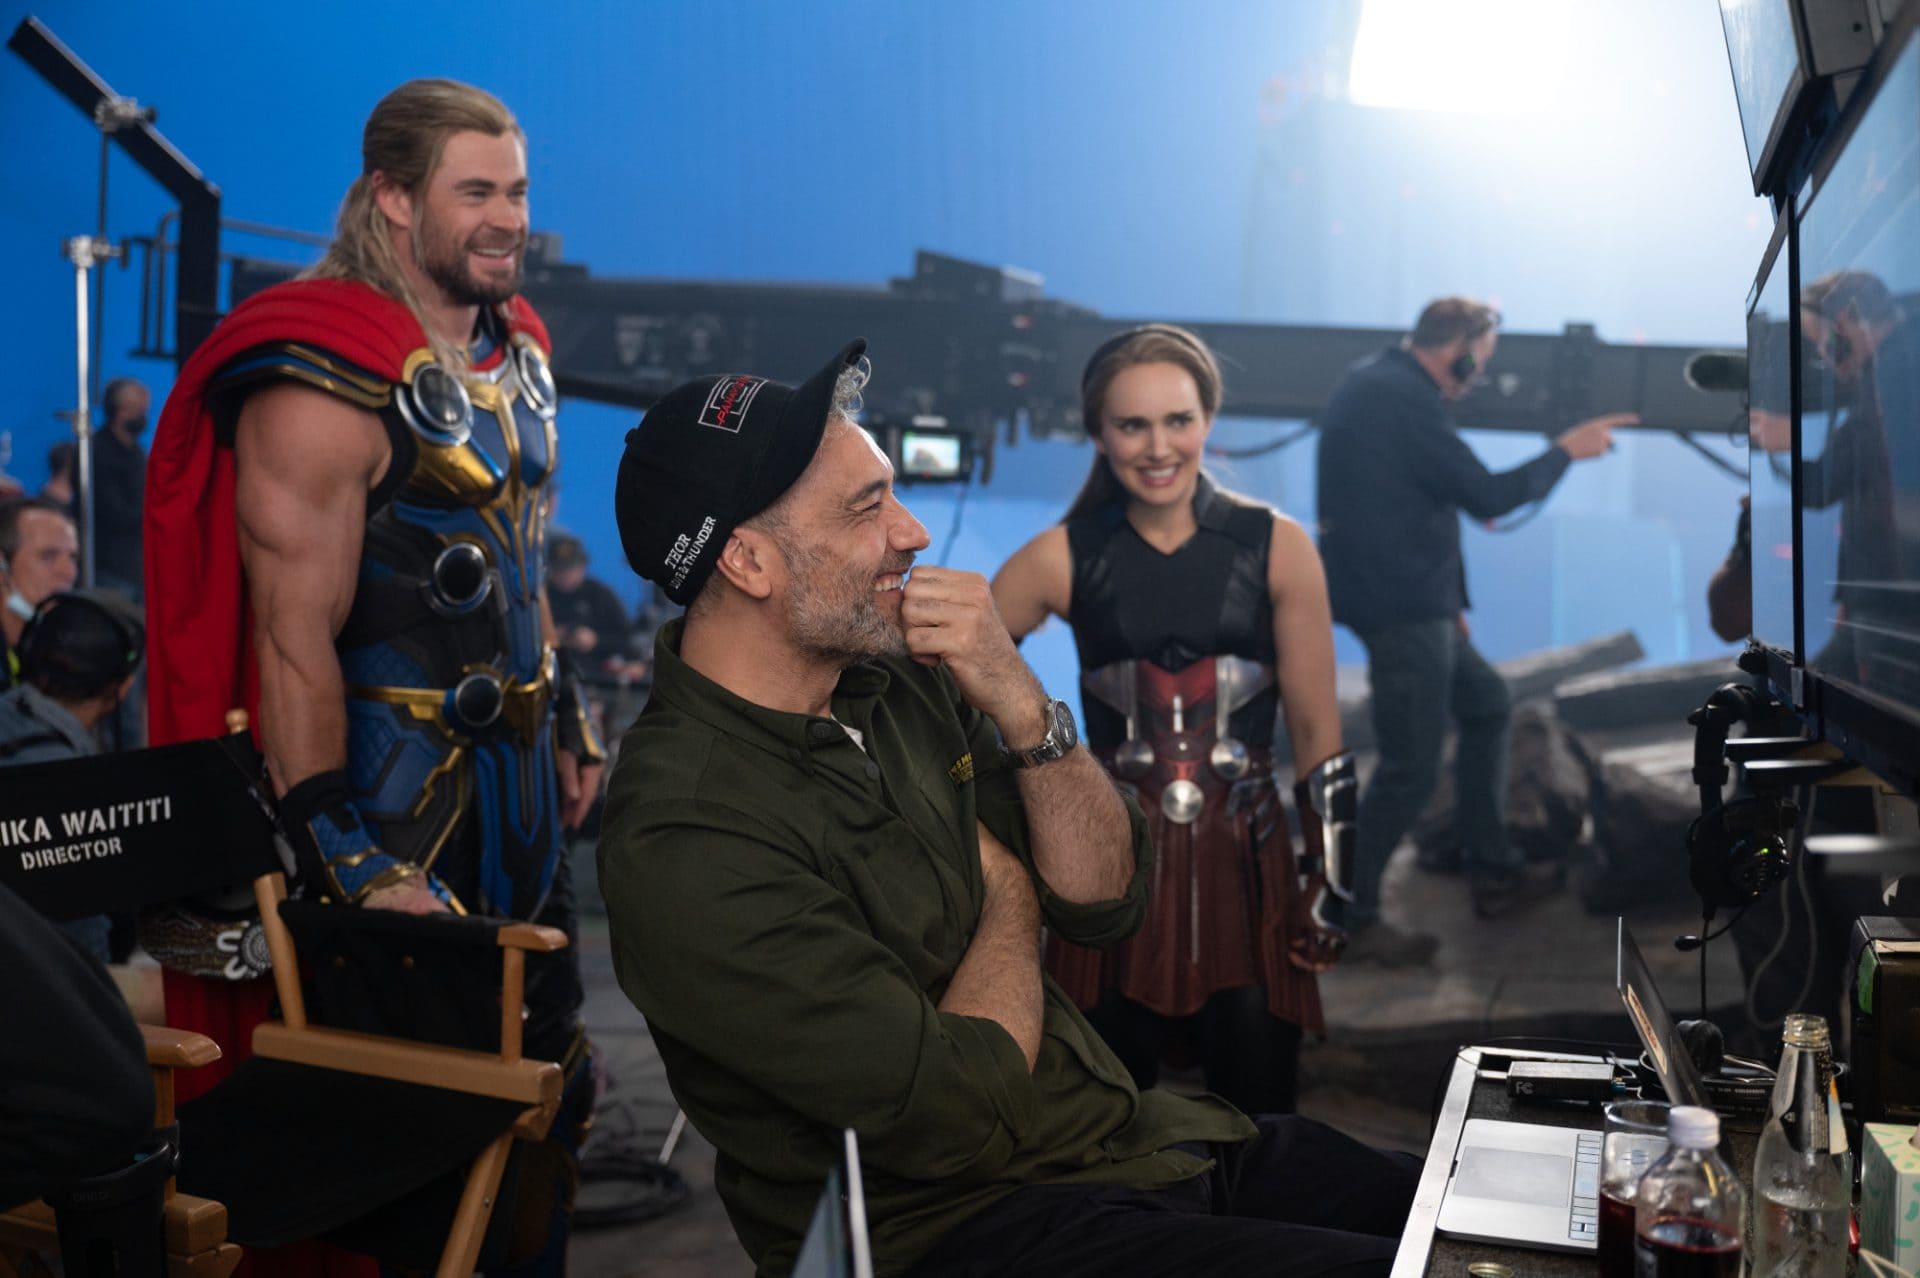 Russell Crowe Reflects on Superhero Films and Memorable Directors